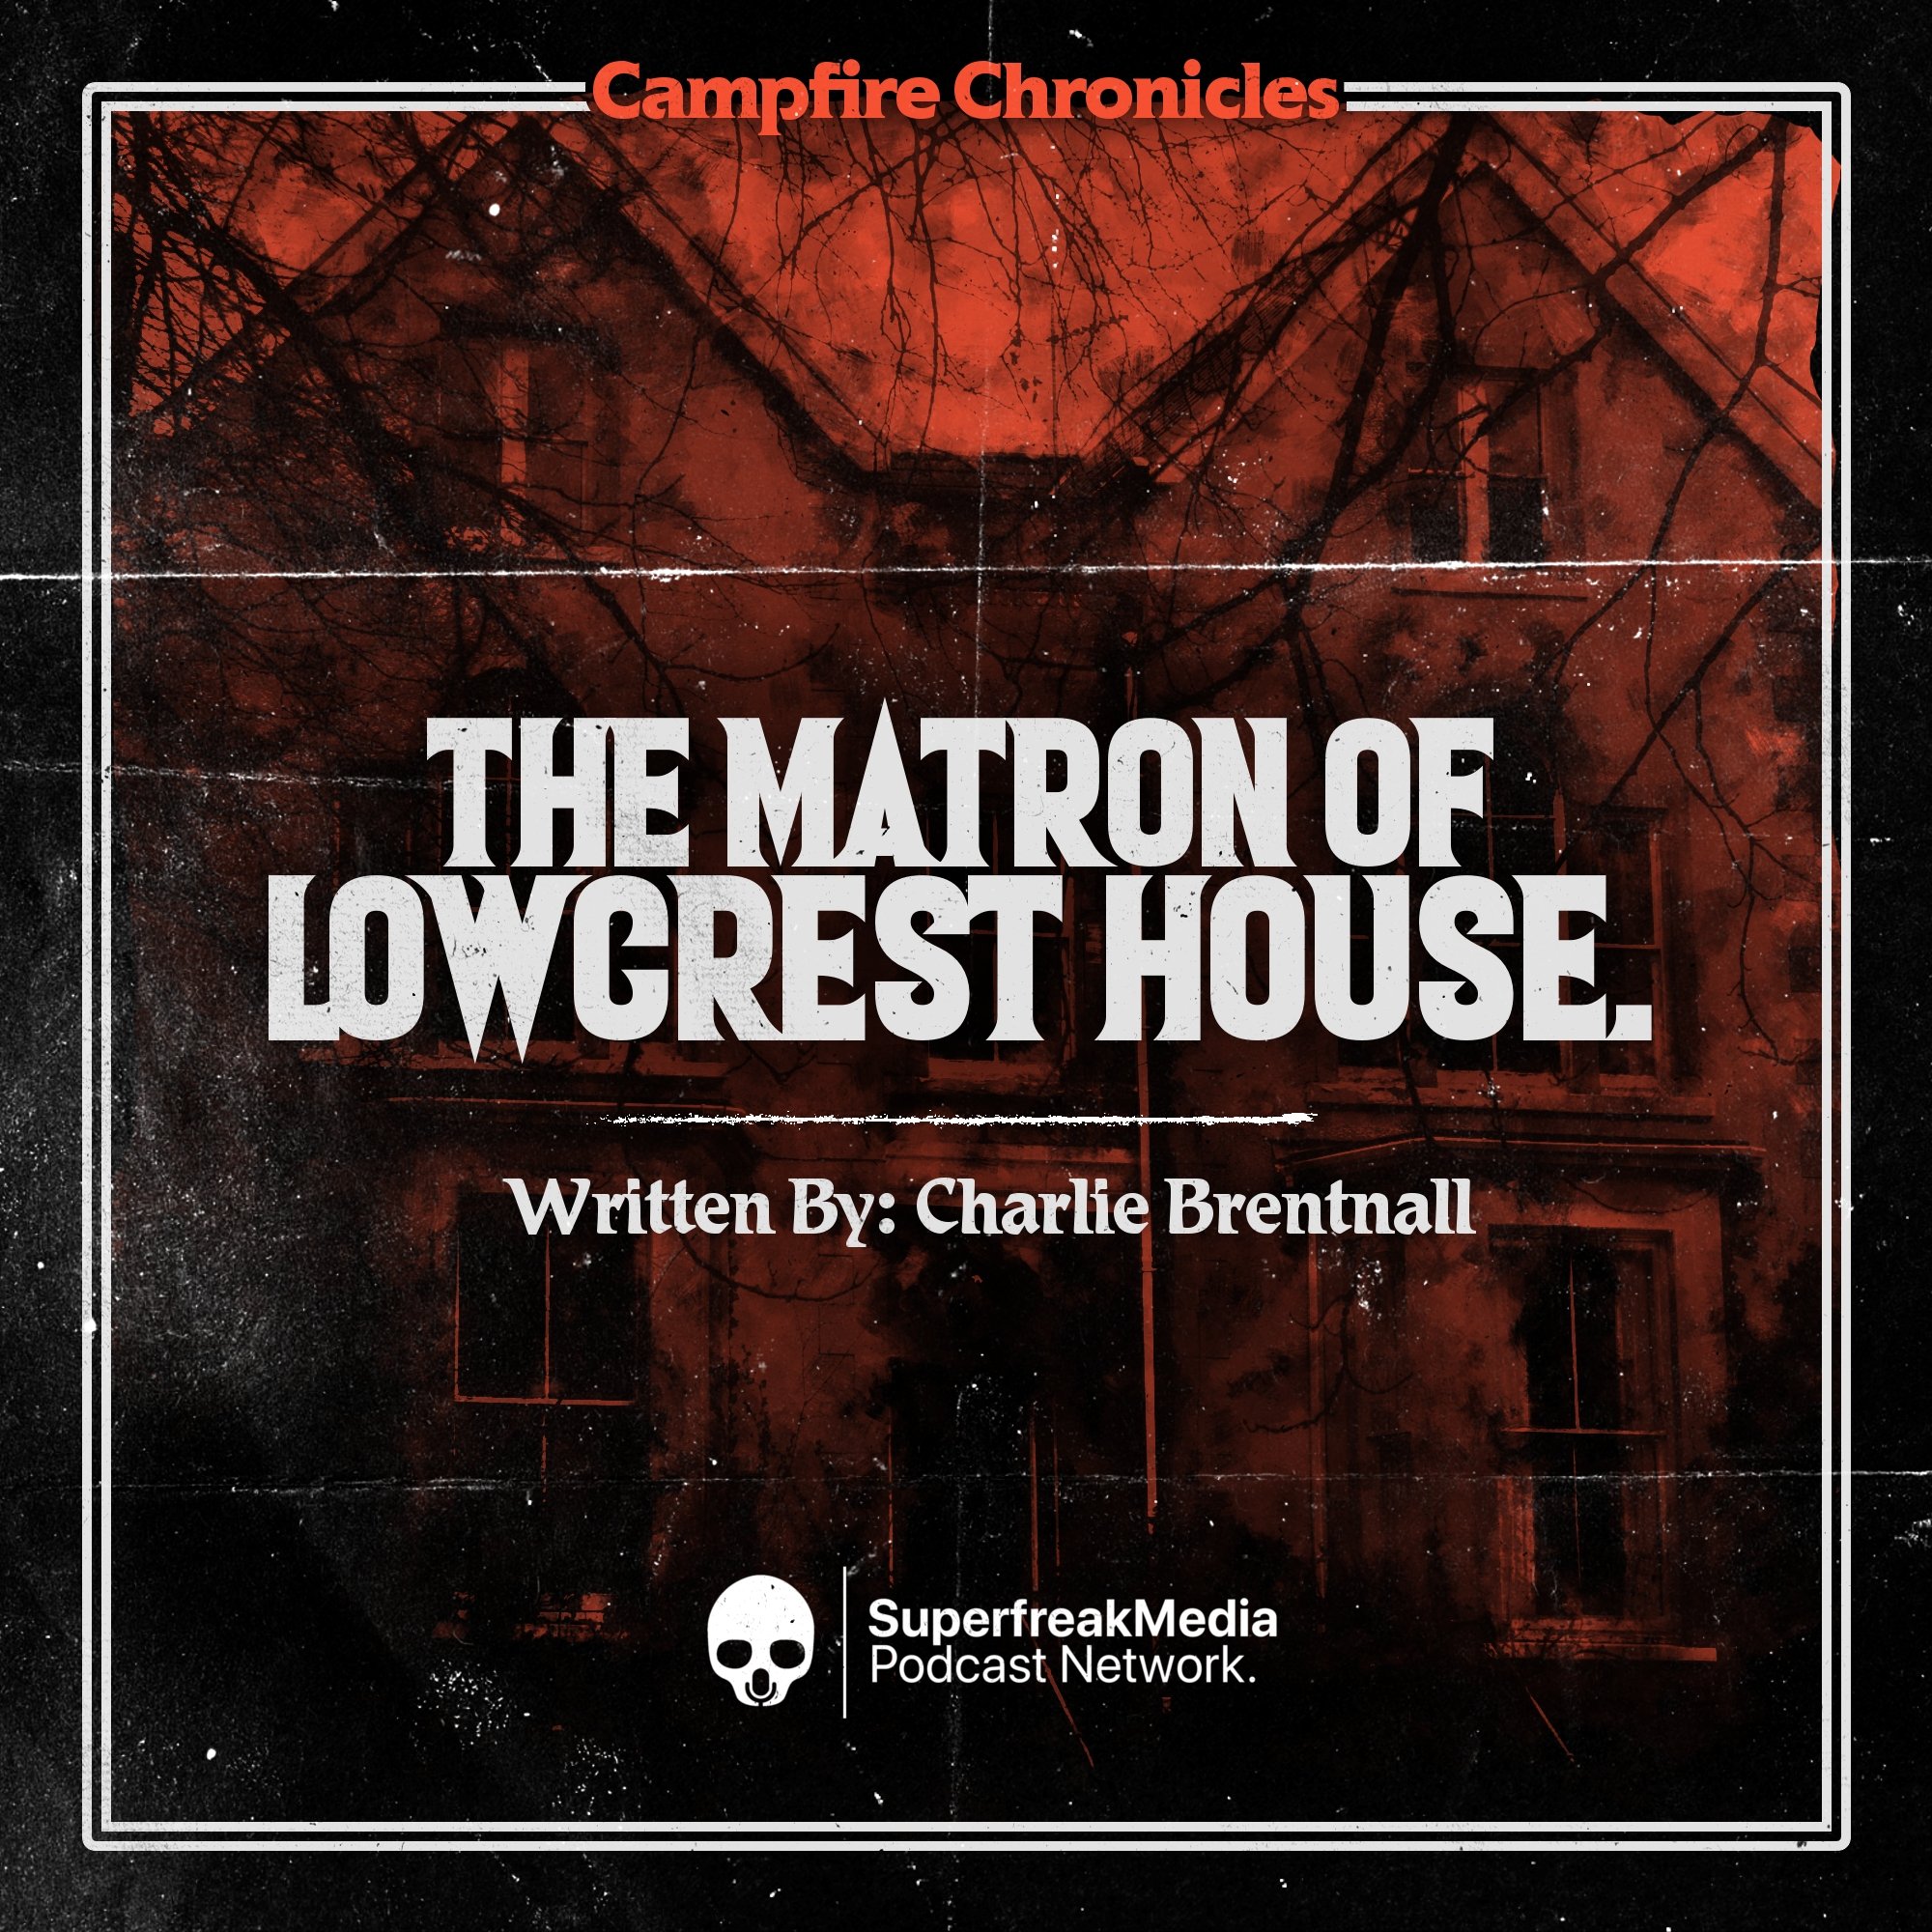 CC - The Matron of Lowcrest House Cover.jpg